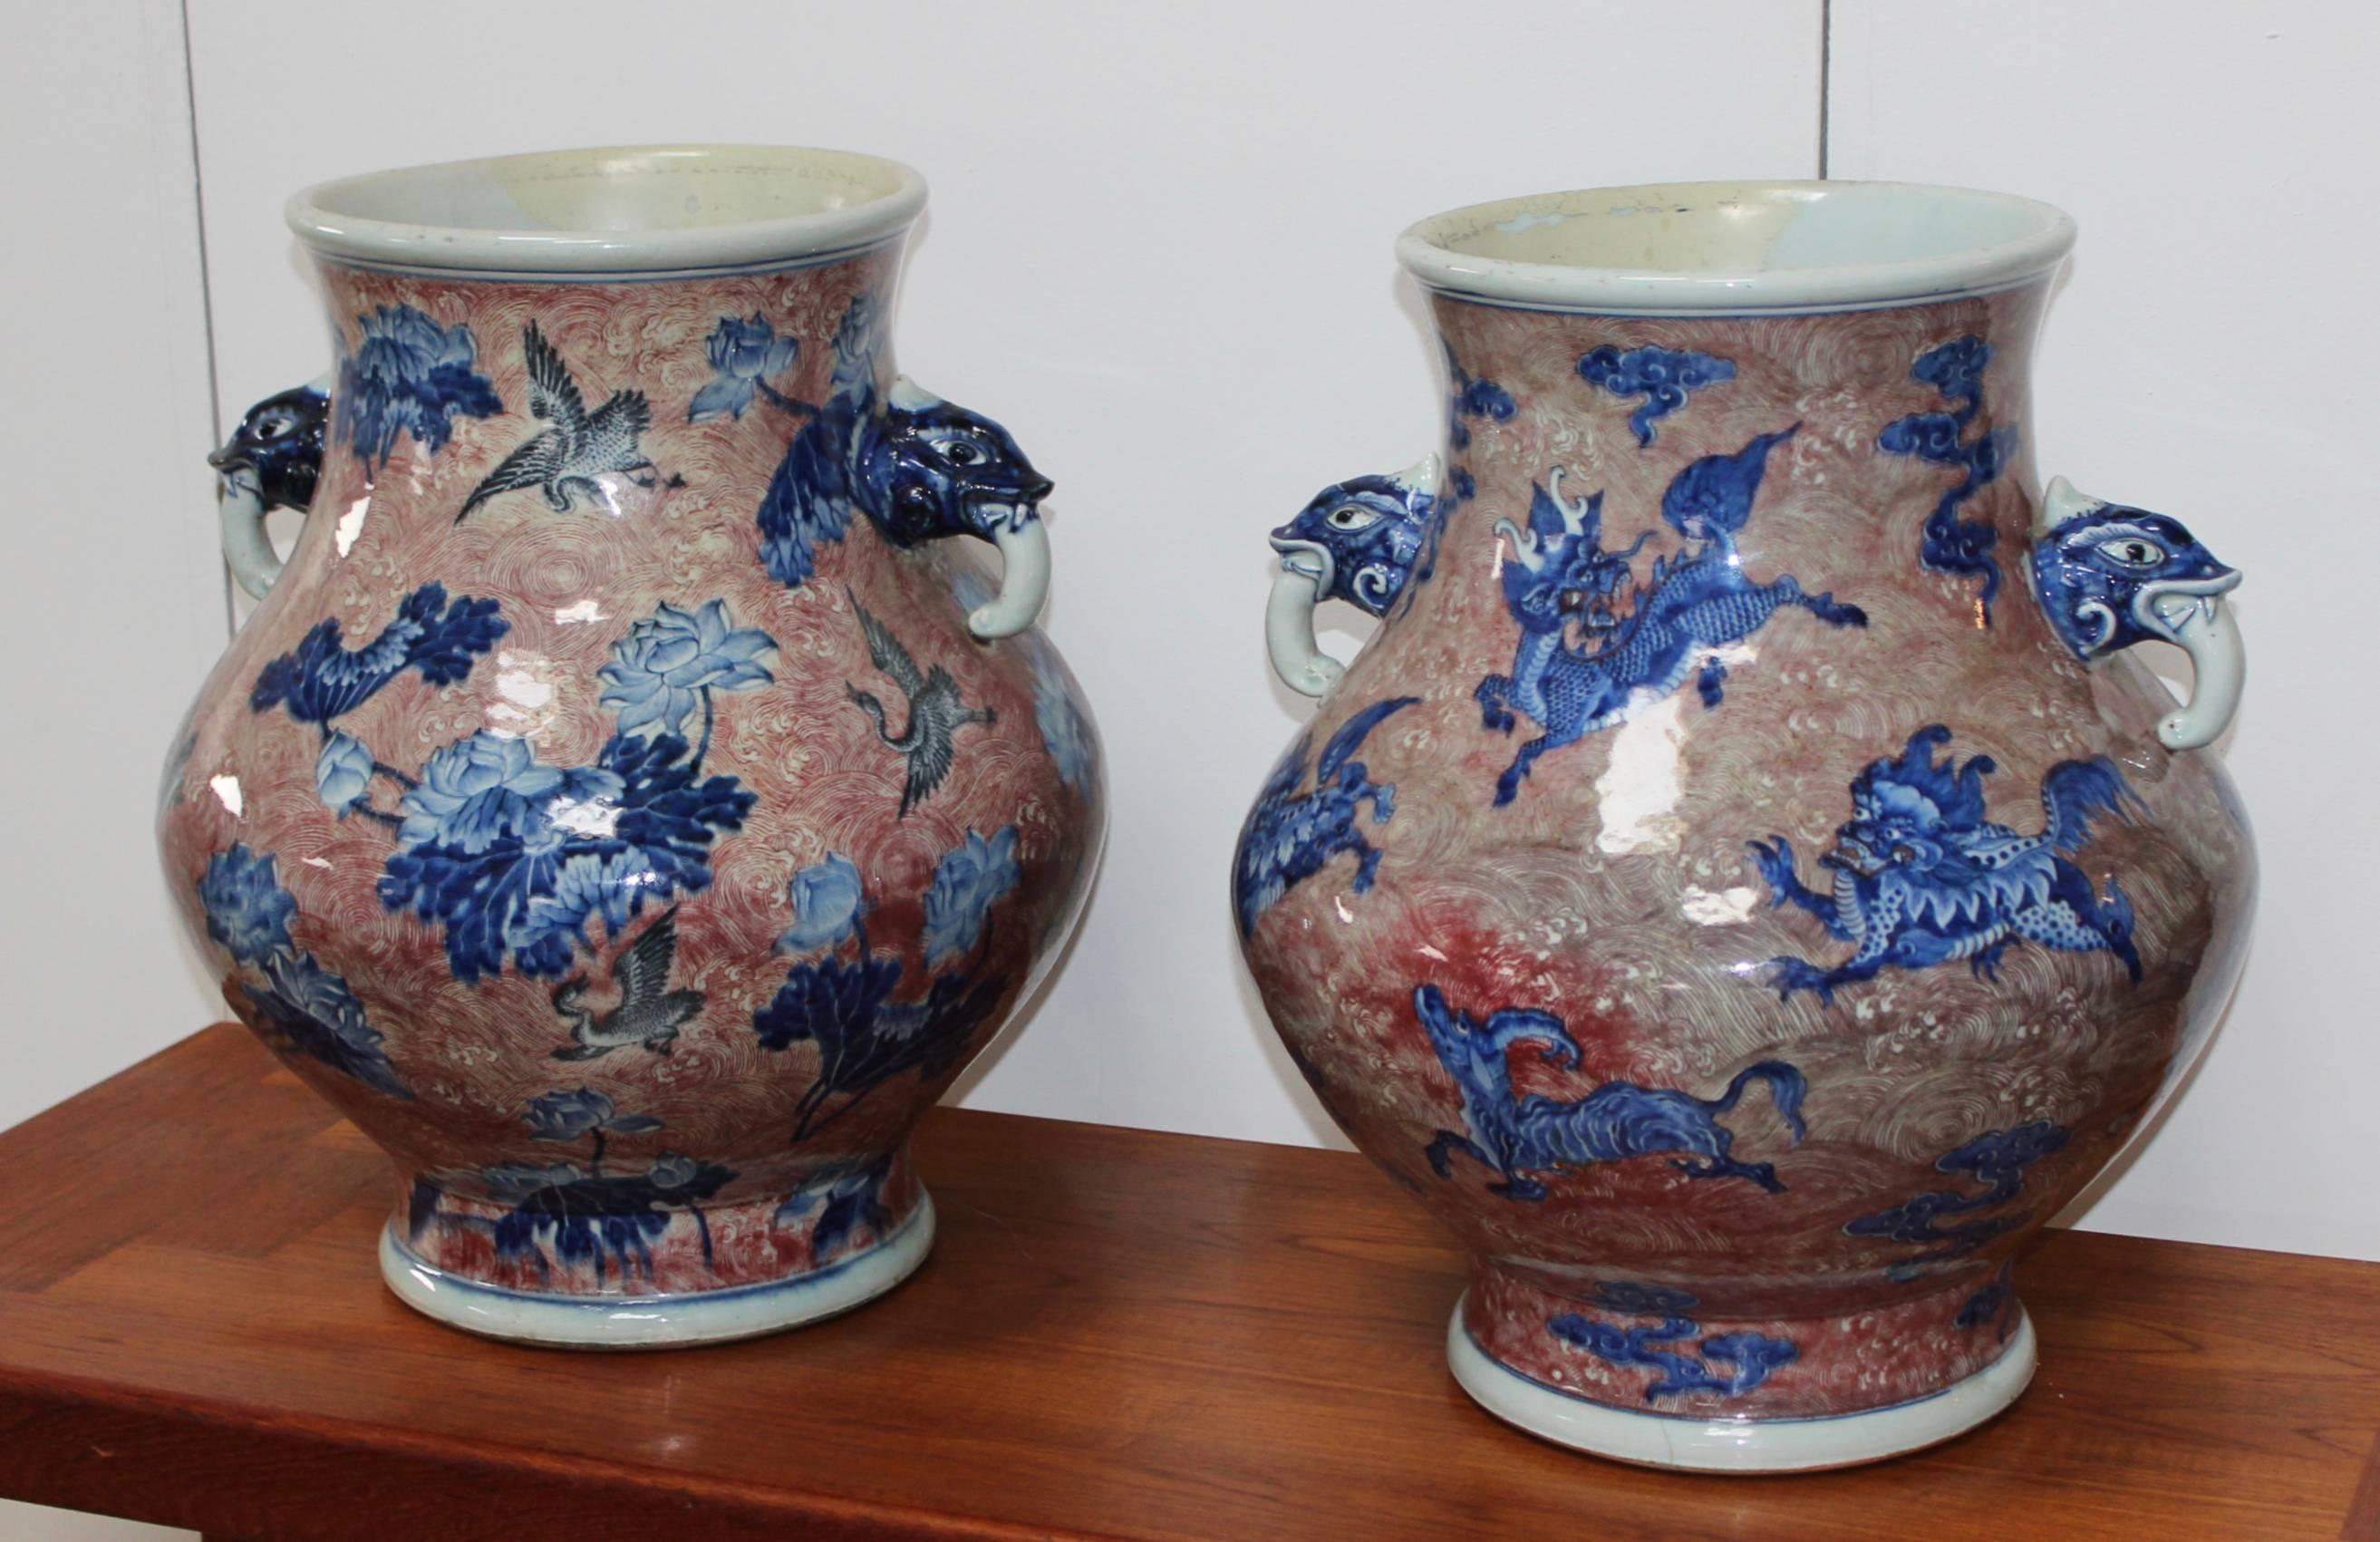 Stunning pair of large 19th century Chinese porcelain vases.